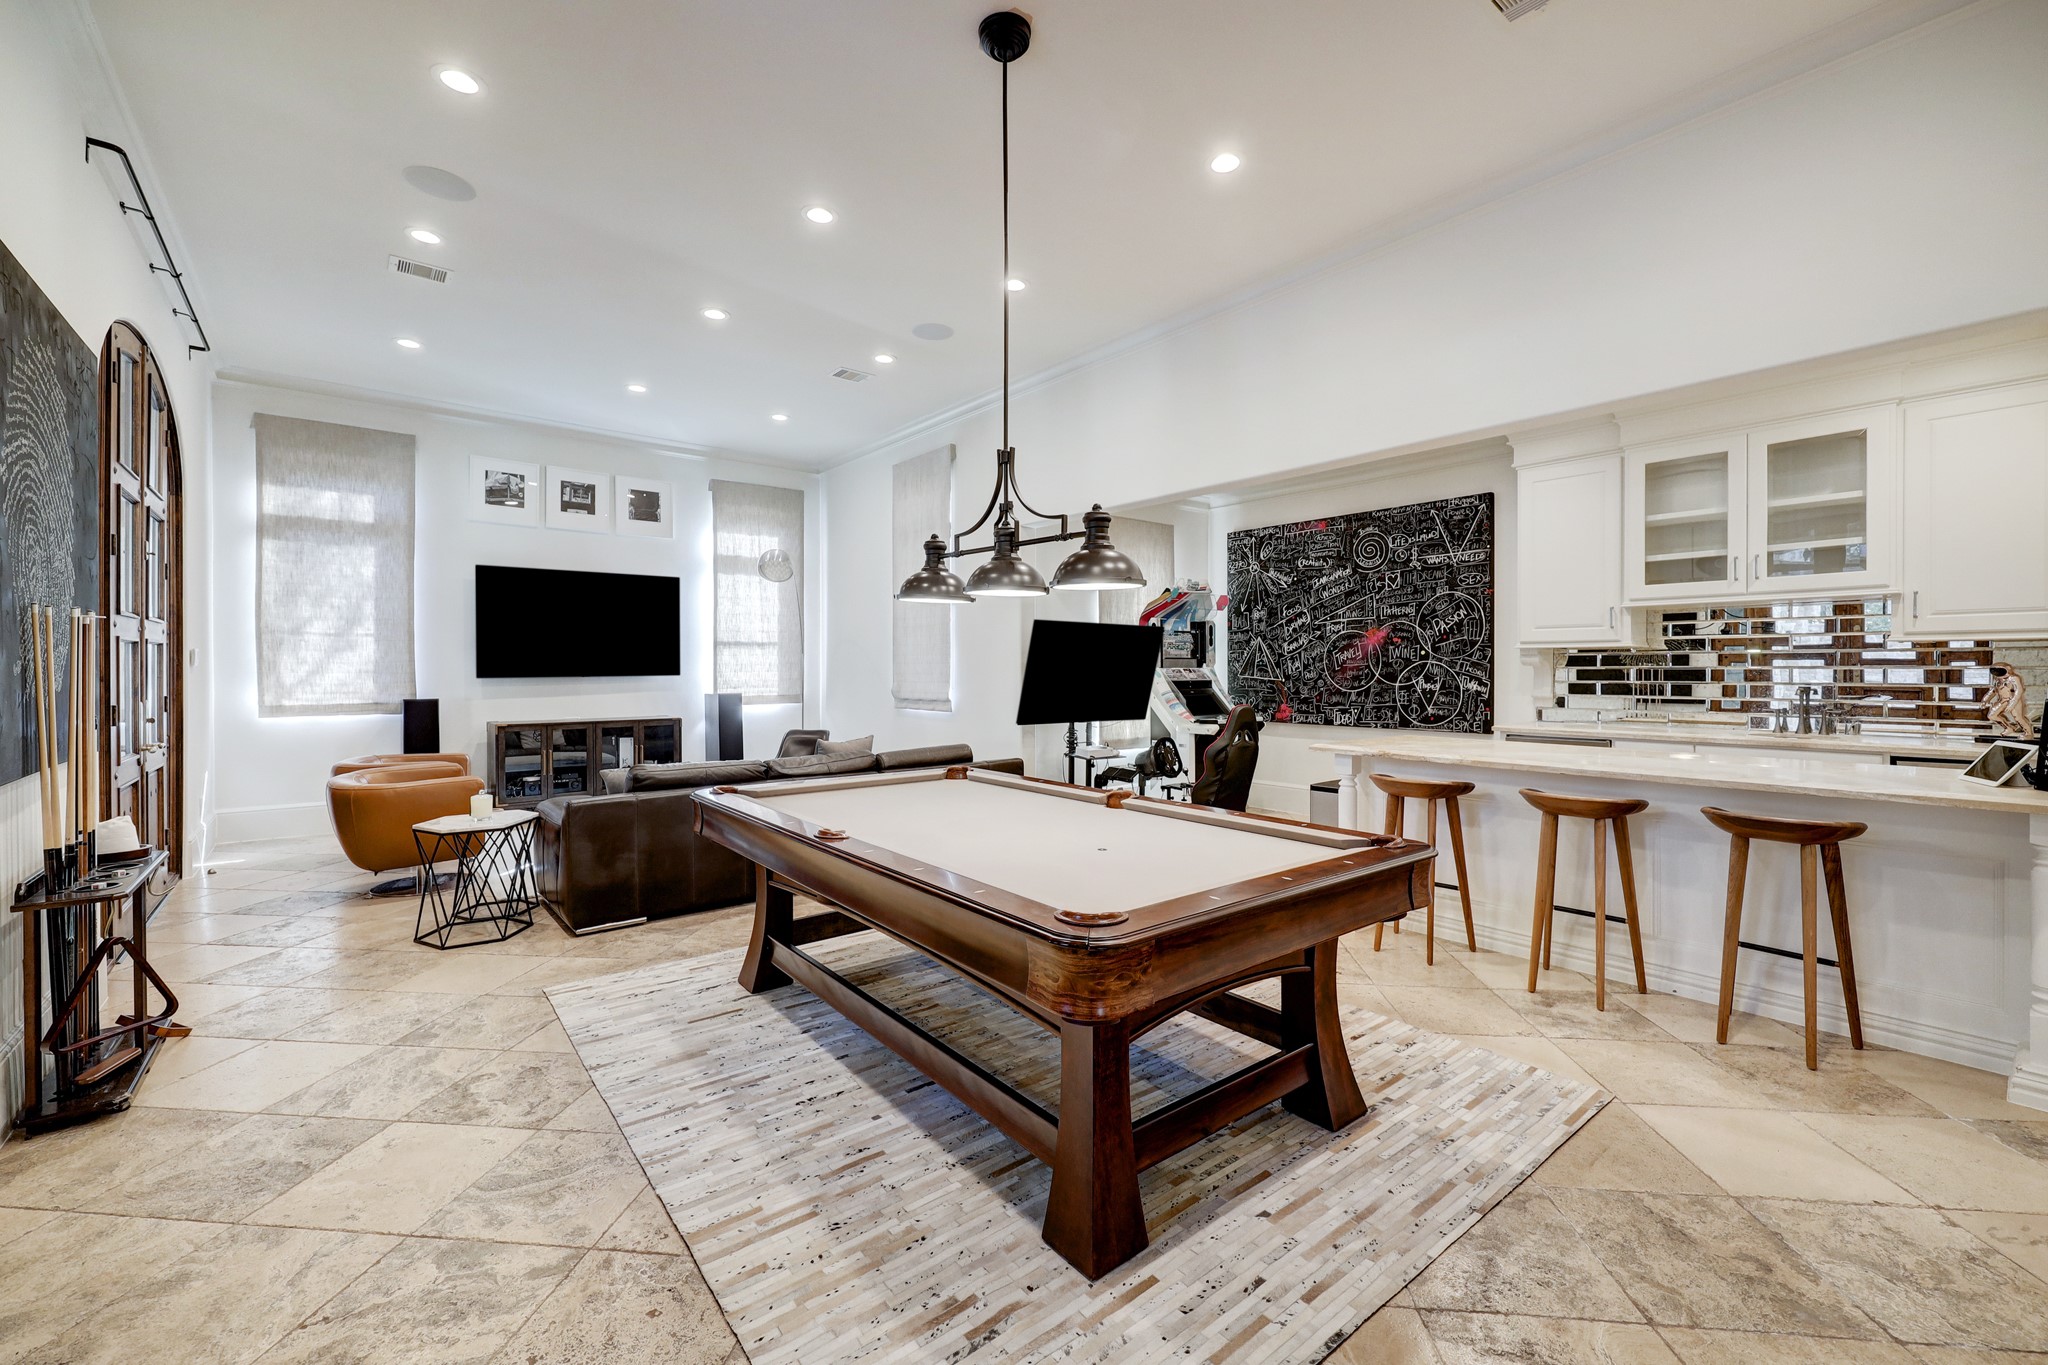 The entertainment room offers a captivating view that showcases its direct access to the summer kitchen and windows overlooking the rear driveway. This layout allows for easy flow between indoor and outdoor entertaining spaces.